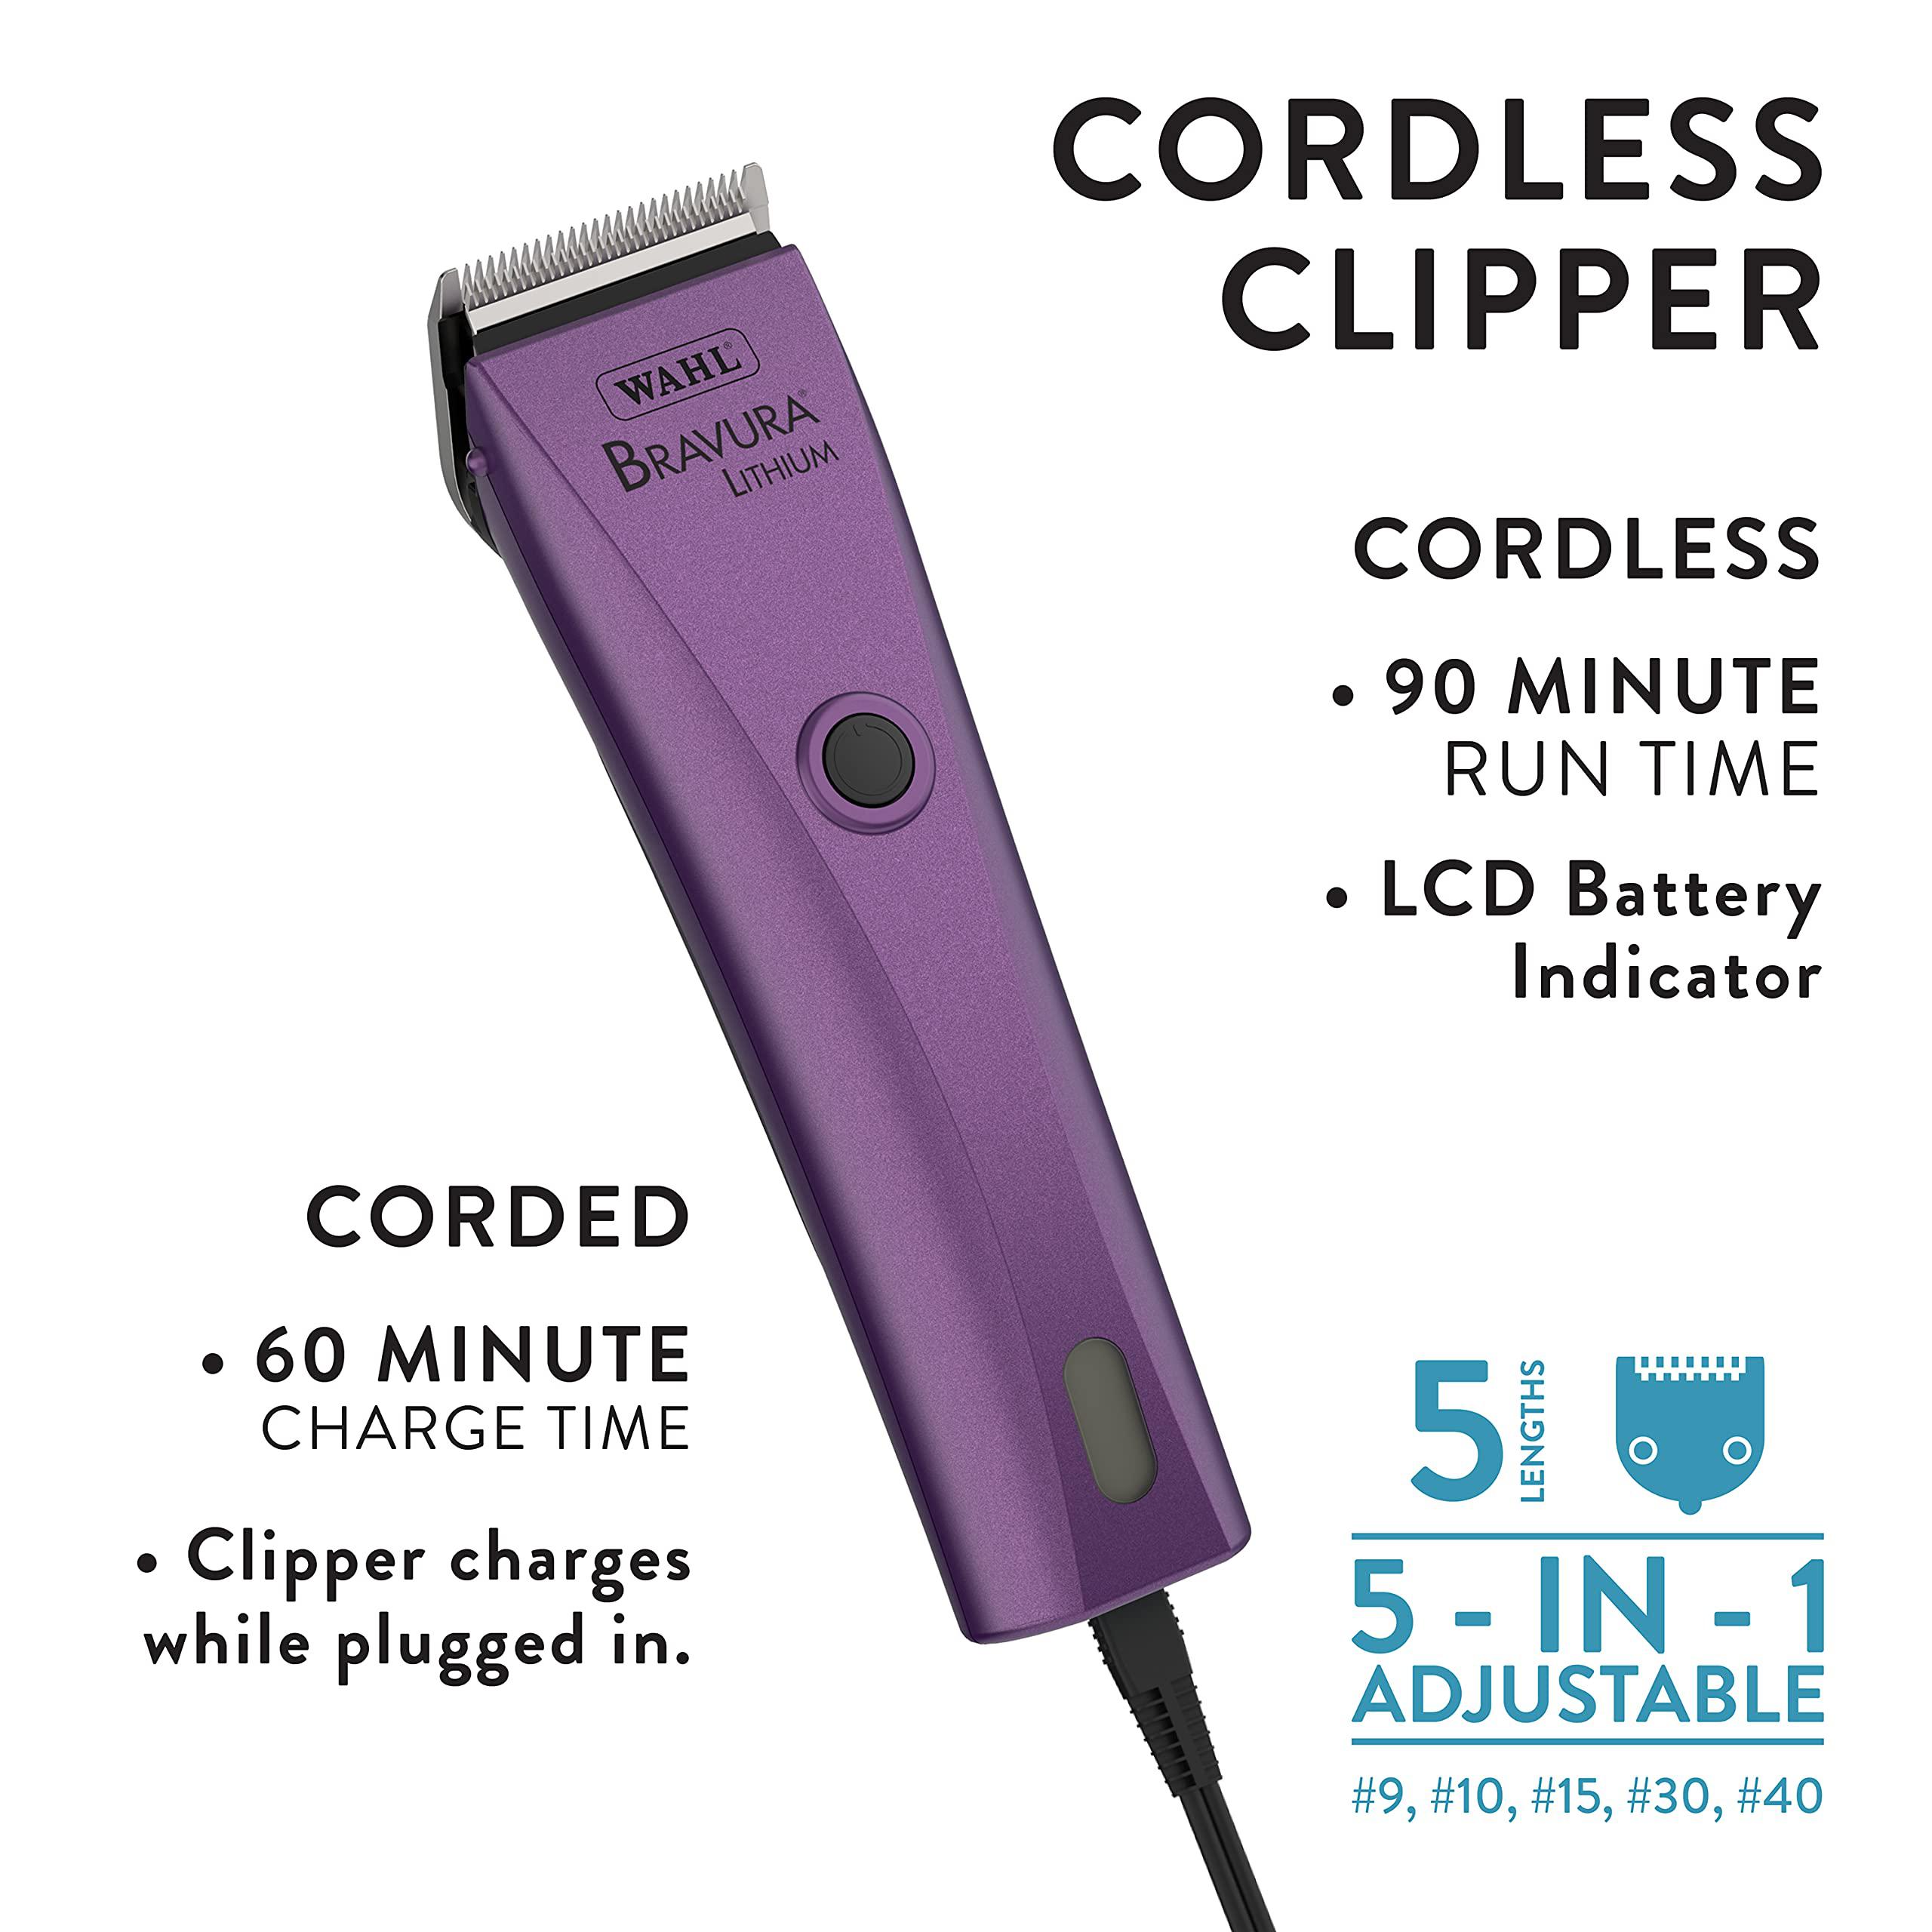 wahl professional animal bravura lithium ion clipper - pet, dog, cat, and horse corded/cordless clipper kit, purple (41870-04